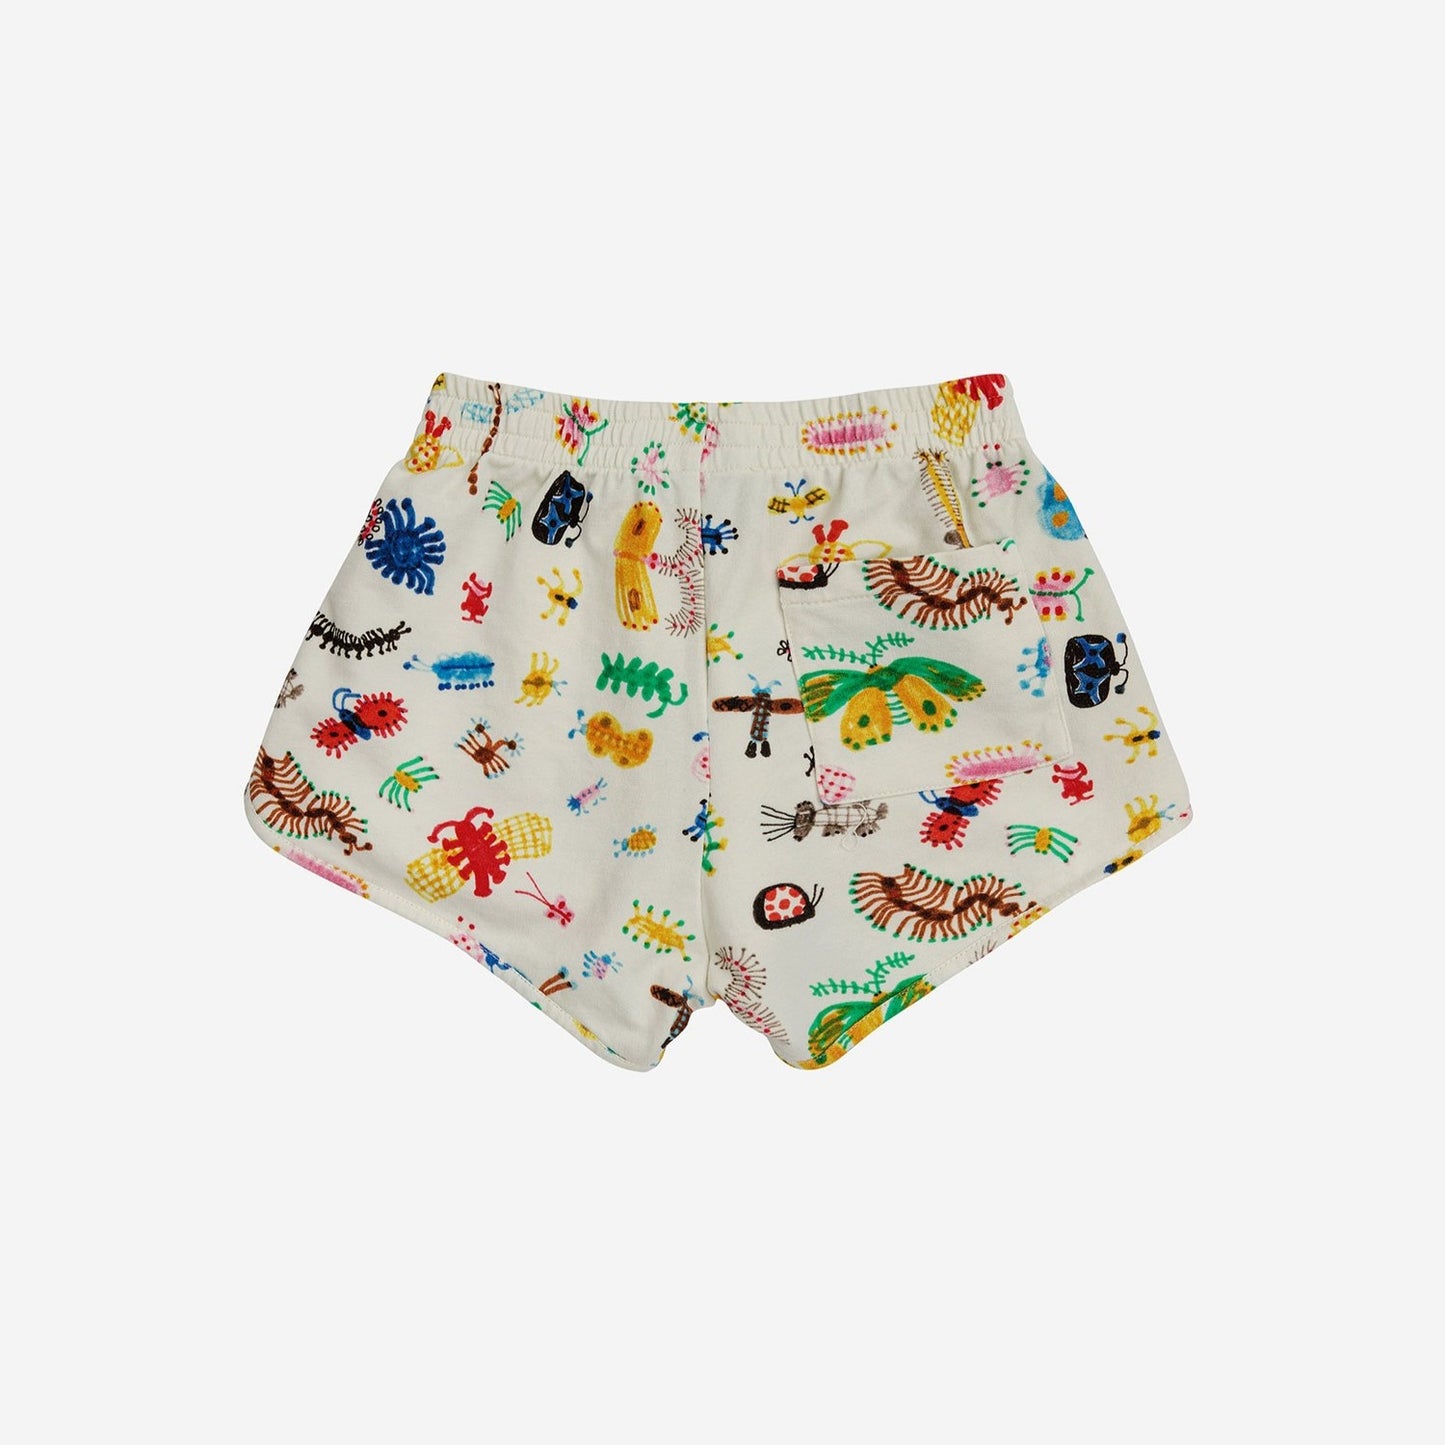 BOBO CHOSES Funny Insects All Over Shorts ALWAYS SHOW